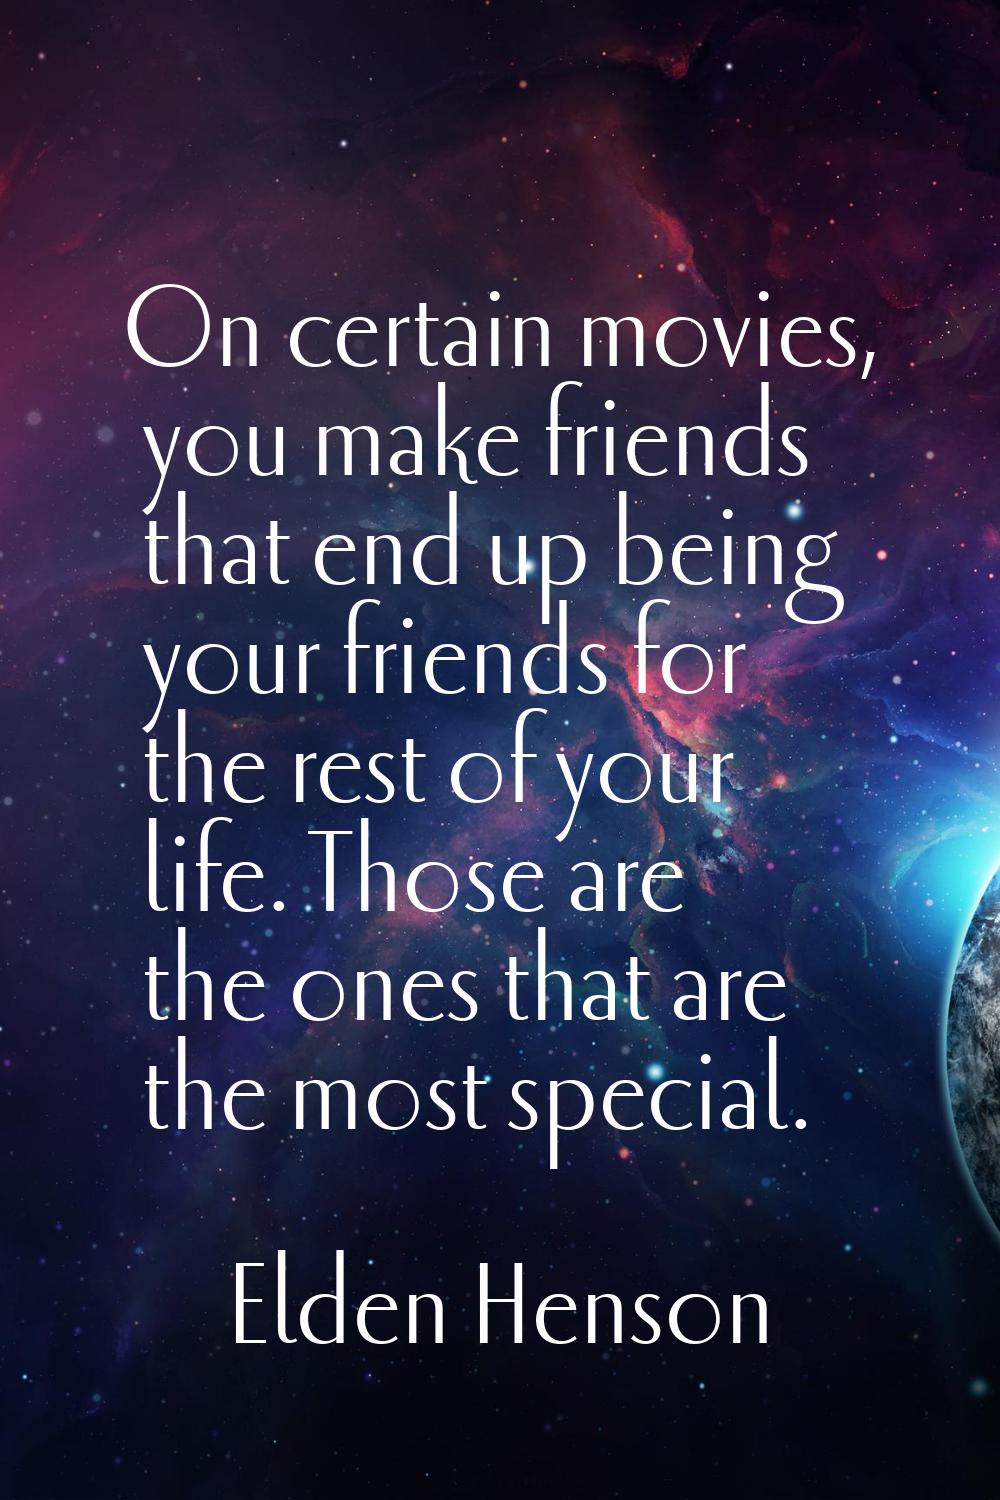 On certain movies, you make friends that end up being your friends for the rest of your life. Those